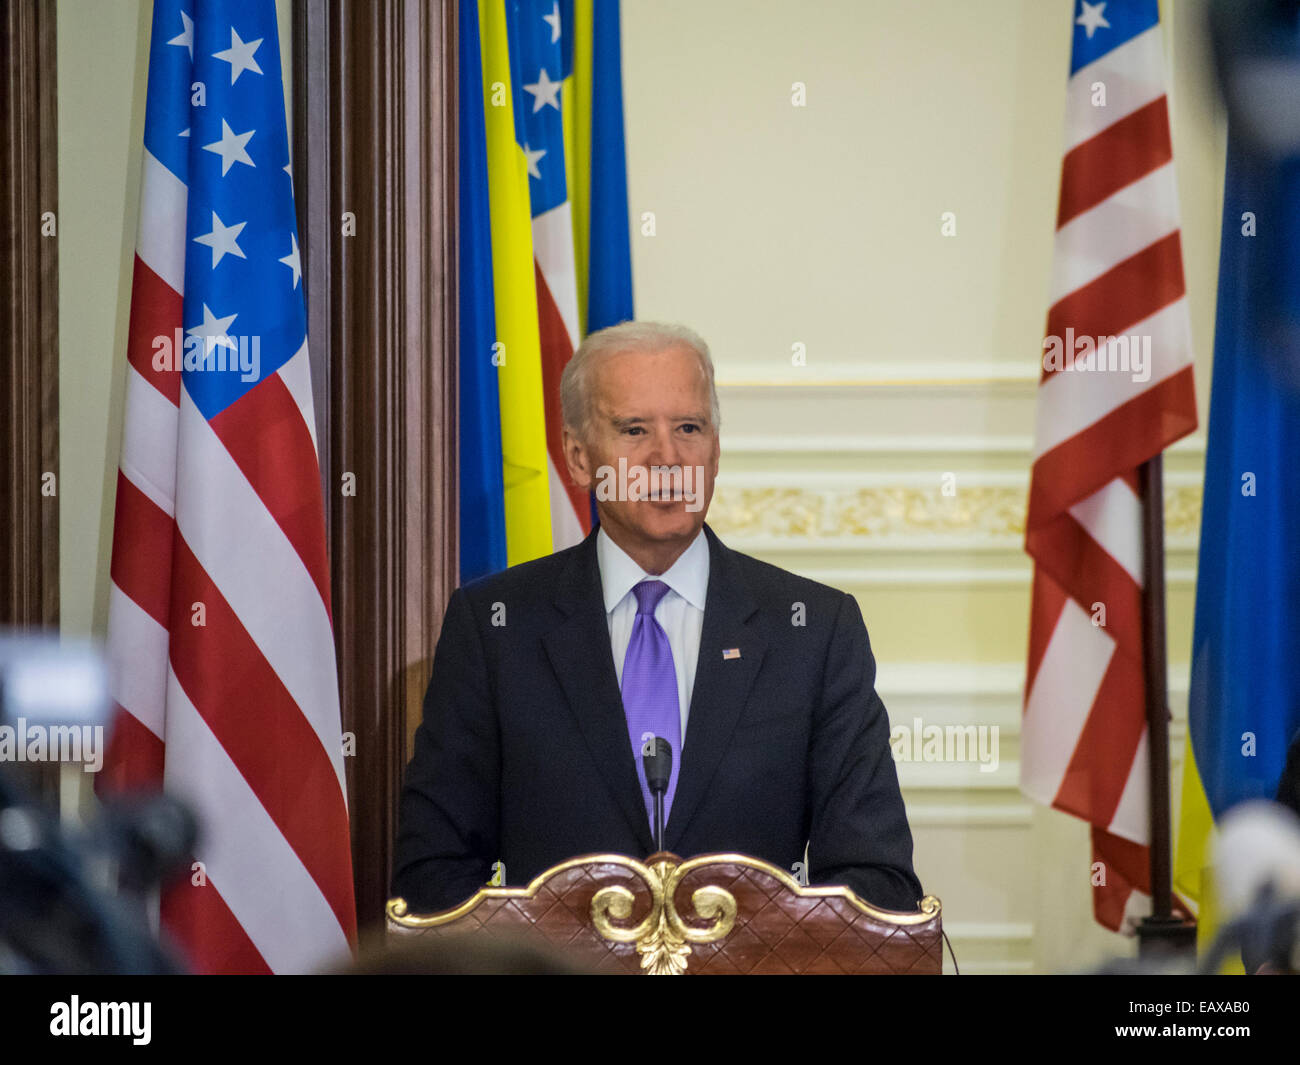 Kiev, Ukraine. 21st Nov, 2014. Vice President Joseph Biden -- If Russia's aggression, it will pay more! - says Joe Biden today November 21, 2014 in Kiev, Ukraine. Talk with Russia about the weakening of the sanctions will be possible only after its Minsk agreements - in particular, the withdrawal of troops and the release of prisoners. This was stated by Vice President Joseph Biden at the joint with the President of Ukraine Petro Poroshenko press statement. Credit:  Igor Golovnov/Alamy Live News Stock Photo